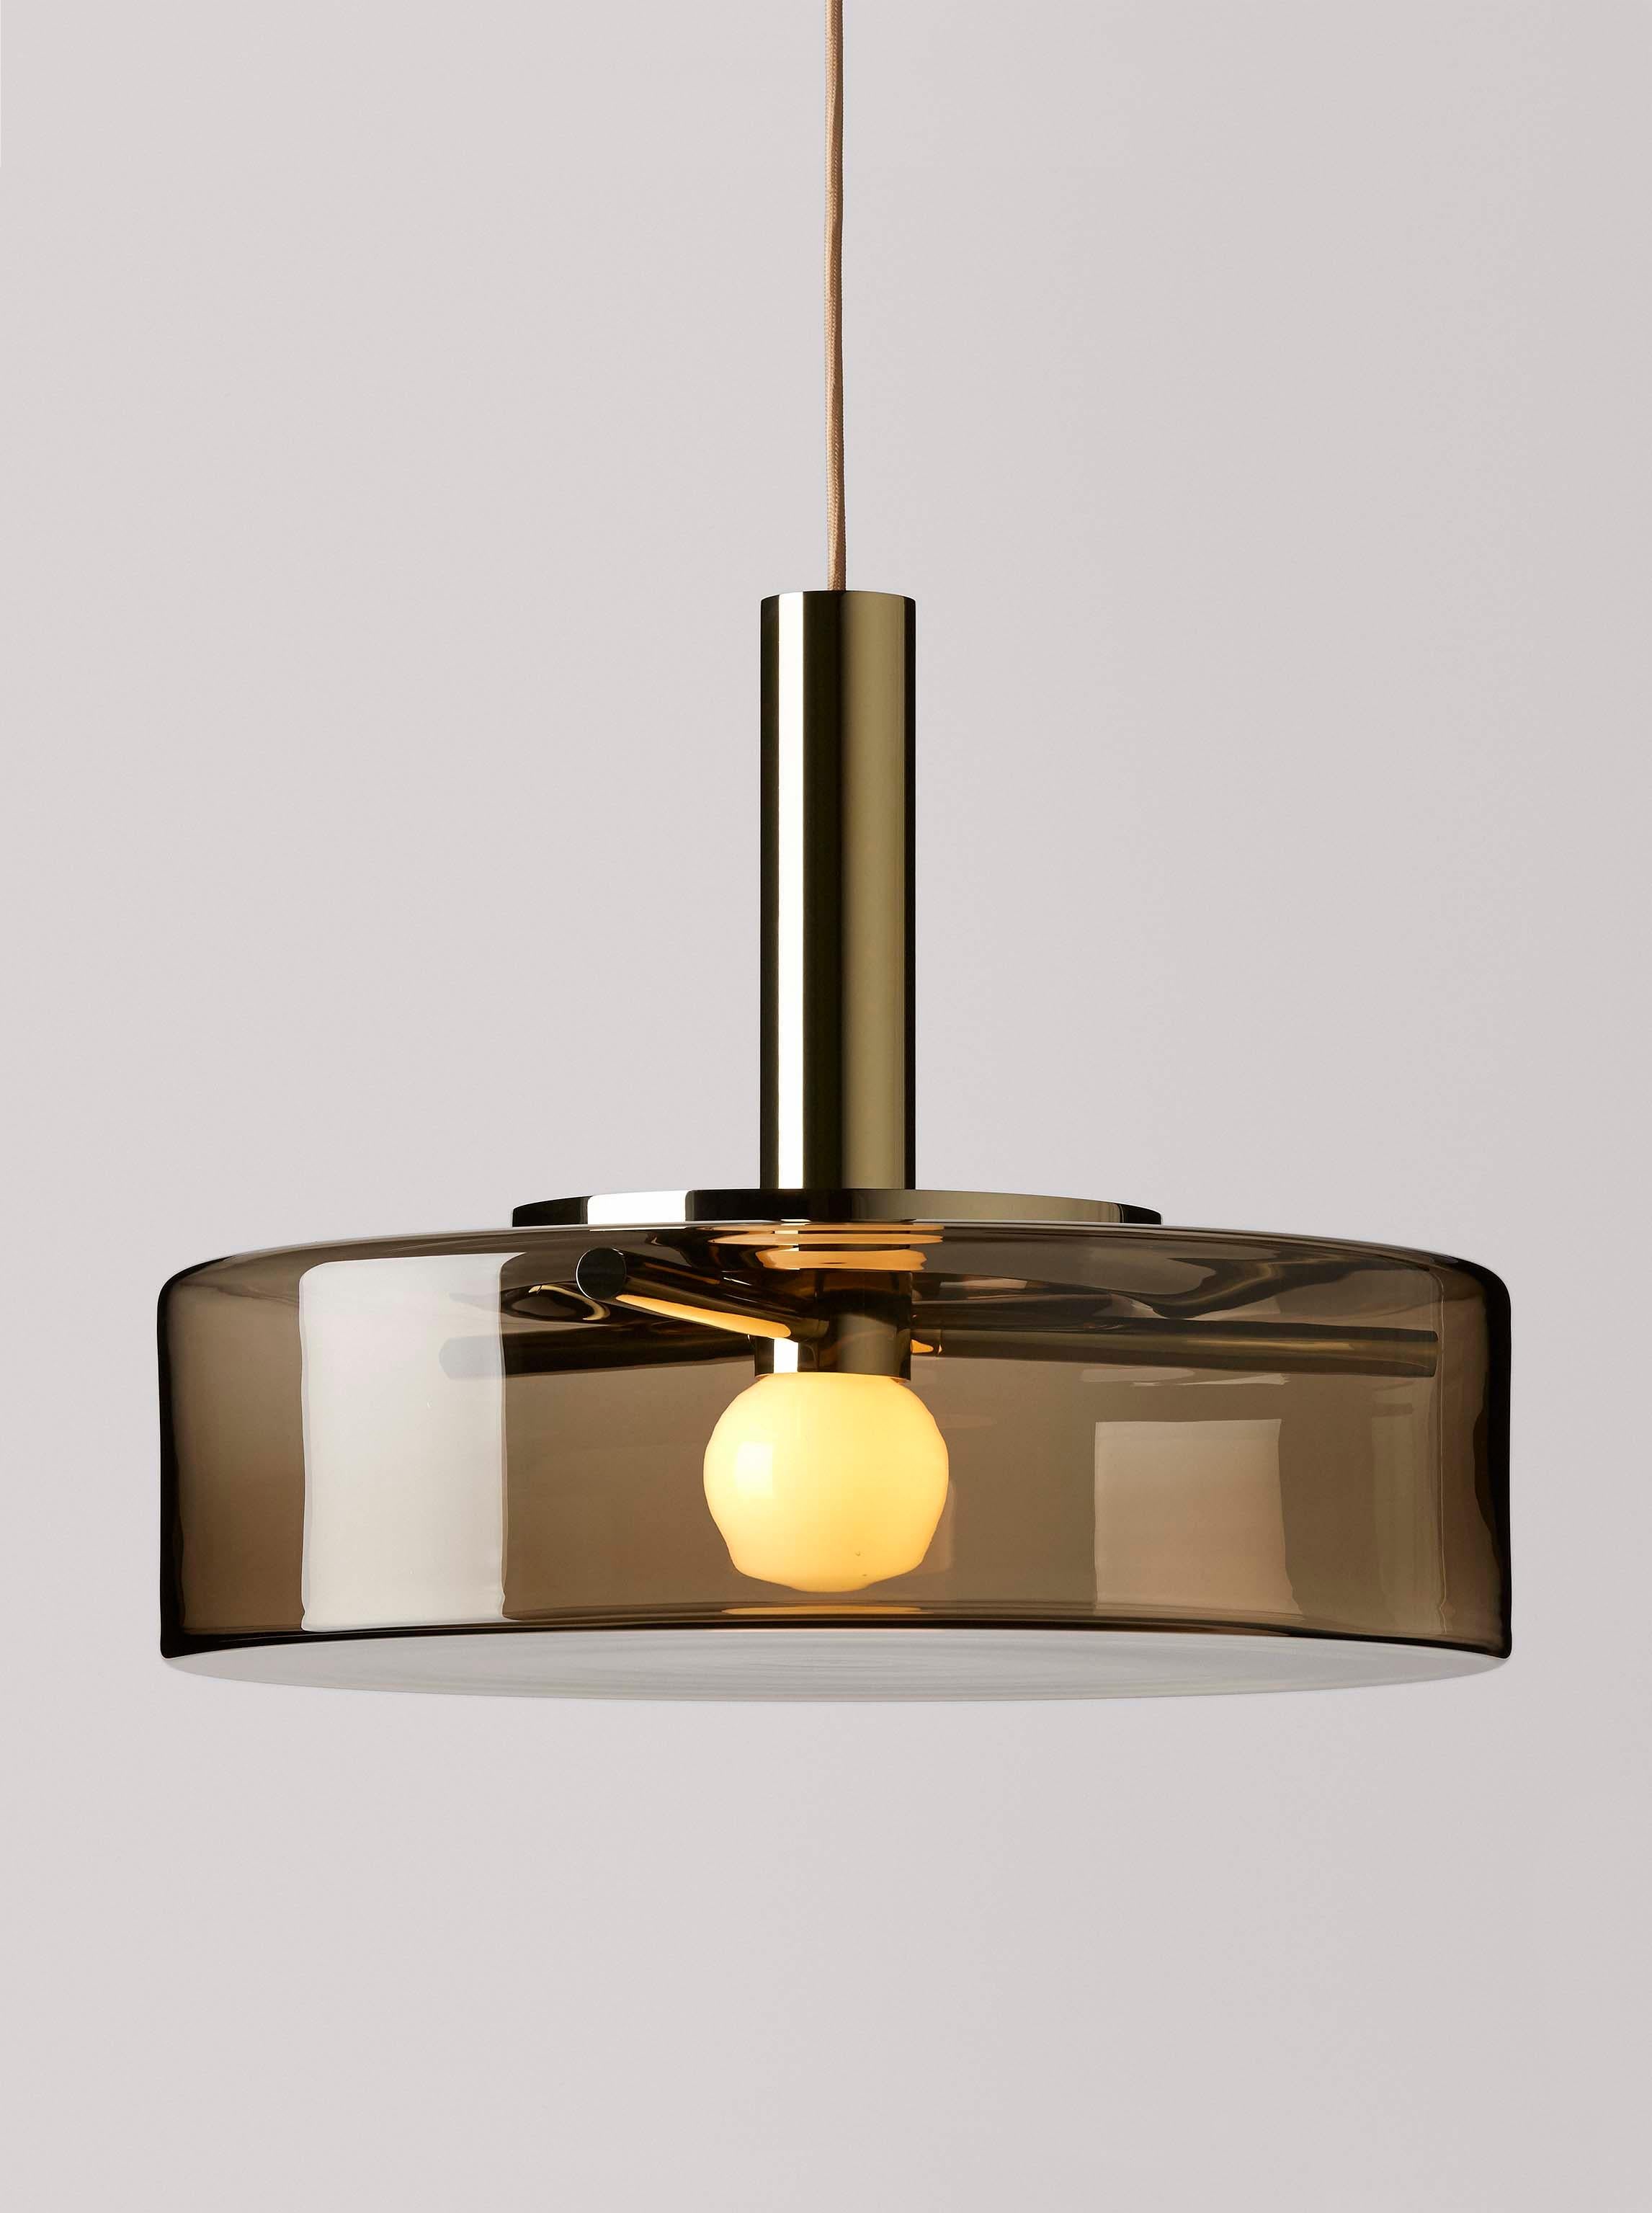 Smoke grey pendant light by Dechem Studio
Dimensions: D 56 x H 180 cm
Materials:brass, glass.
Also available: different colours and sizes available,

Named after the series of successful Czechoslovak science satellites that orbited the Earth in